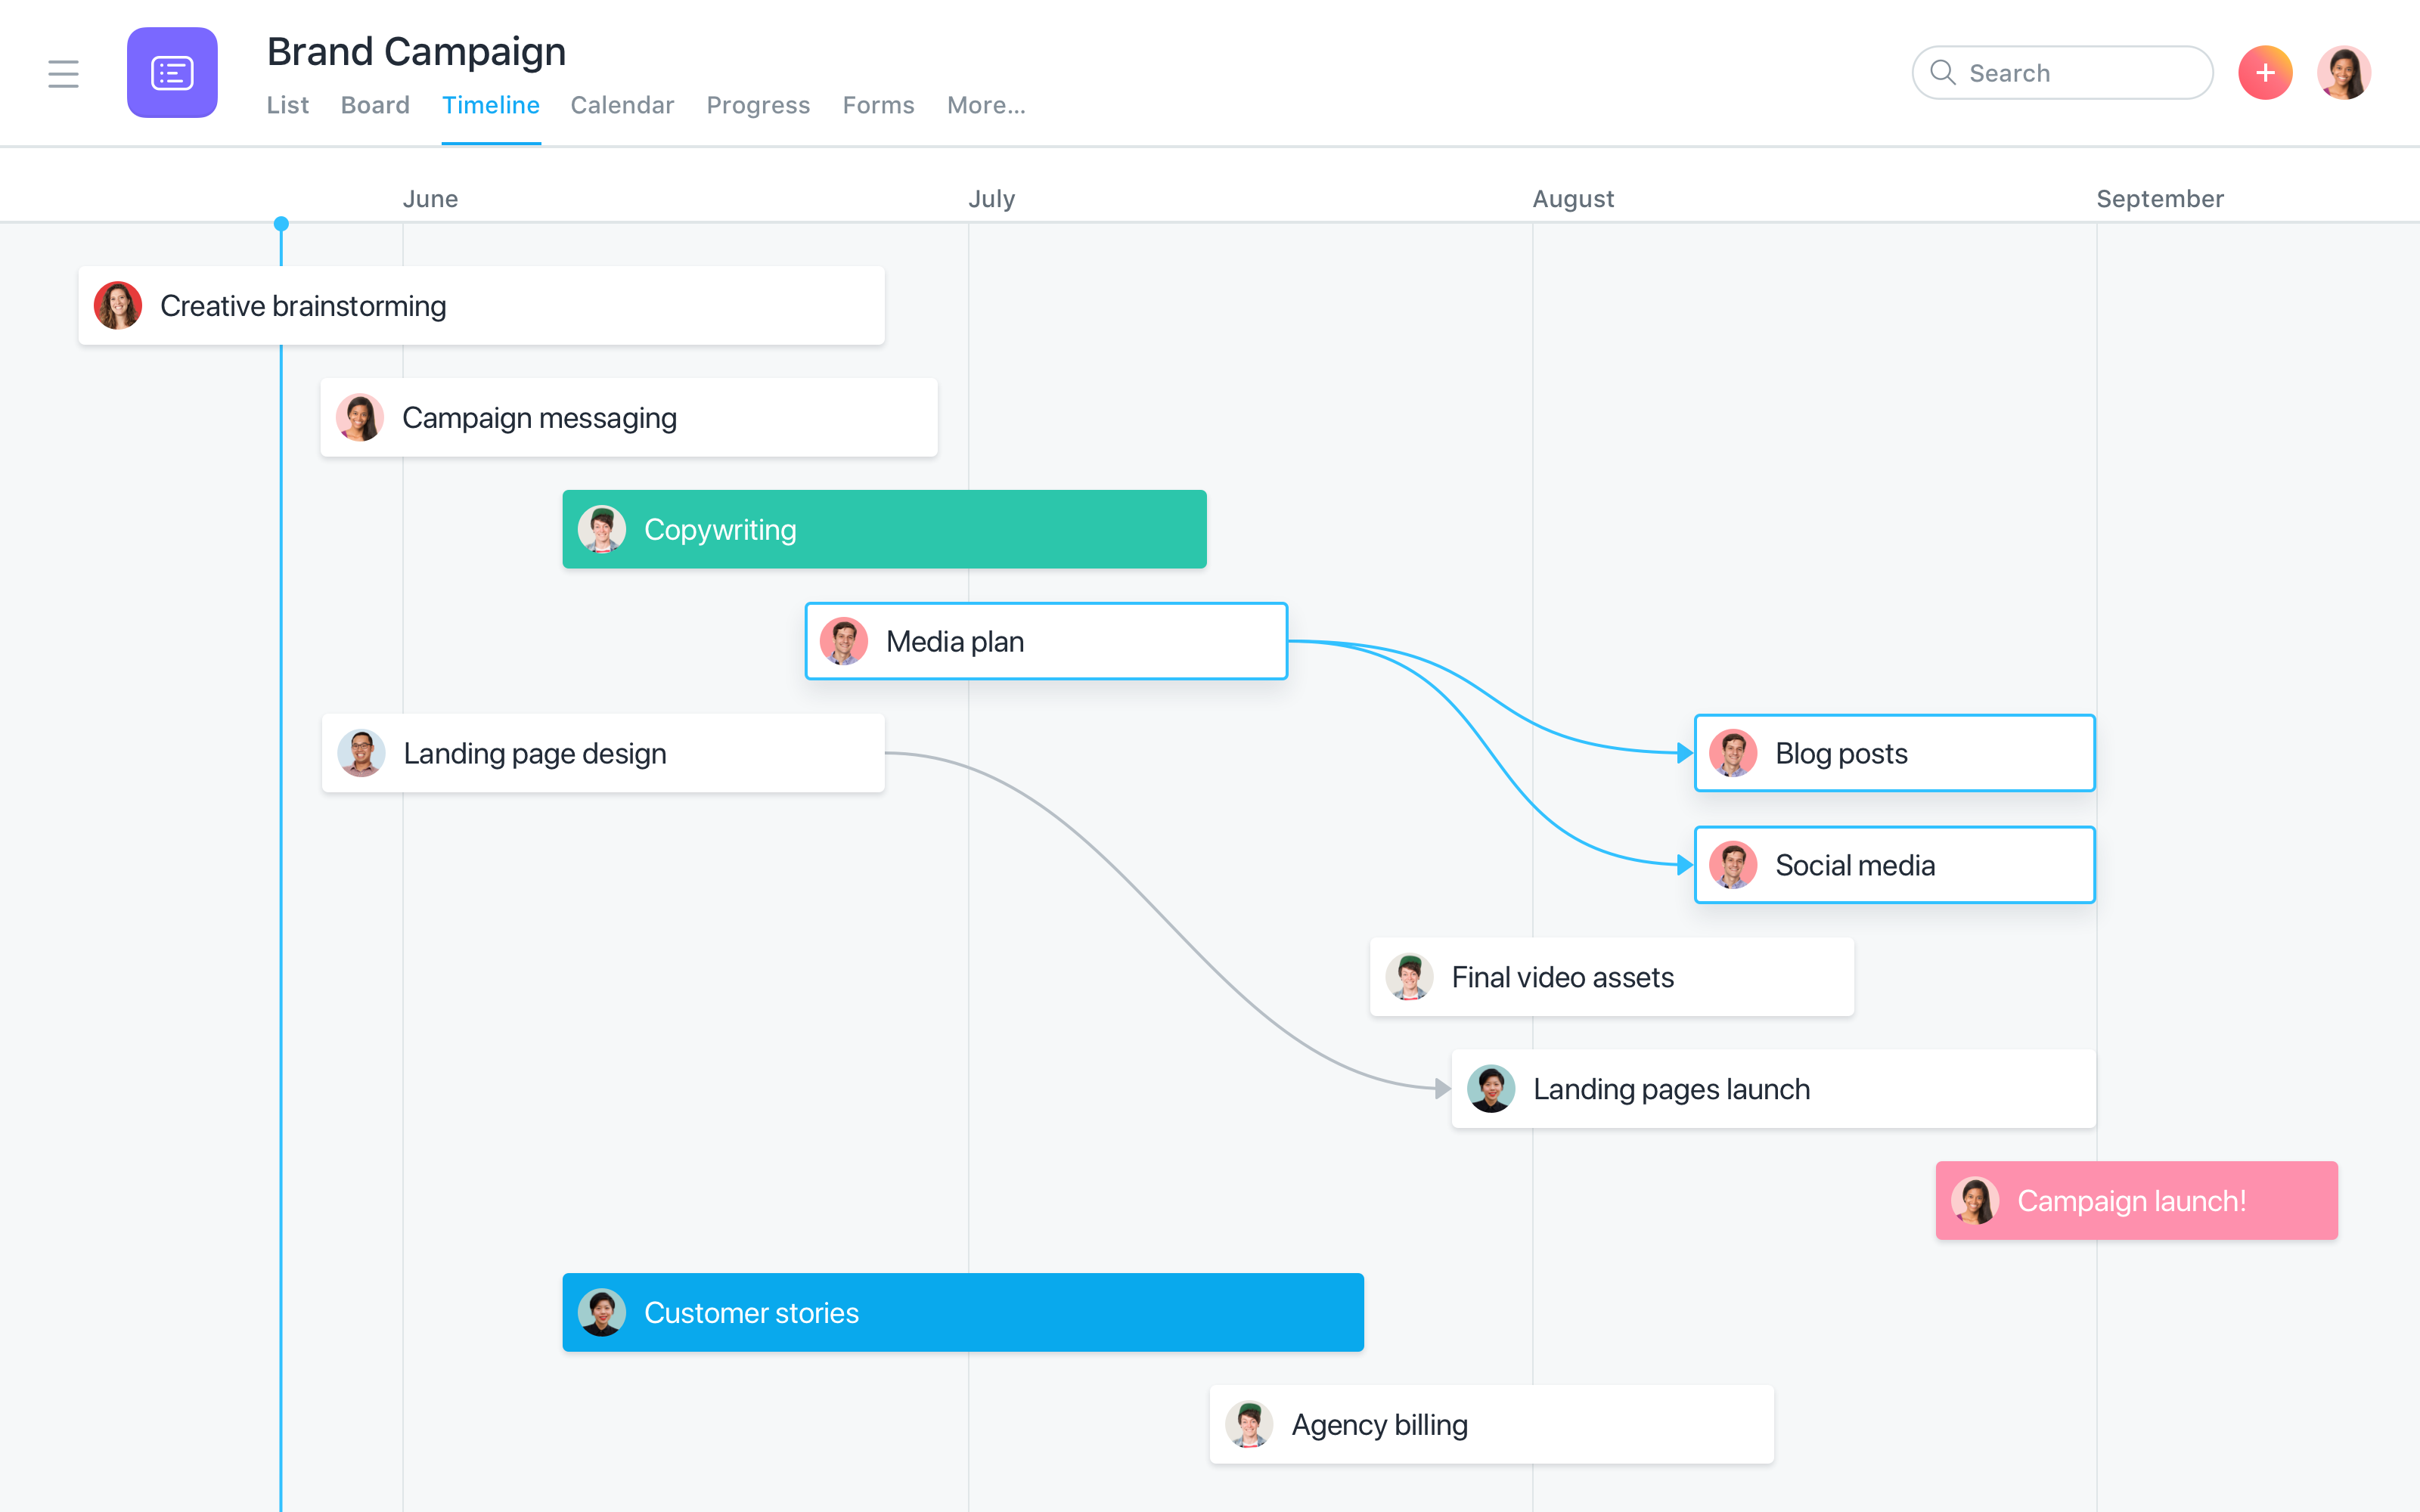 Asana Software - Timeline shows you how each piece of your project fits together so you can start projects on the right foot and hit your deadlines.